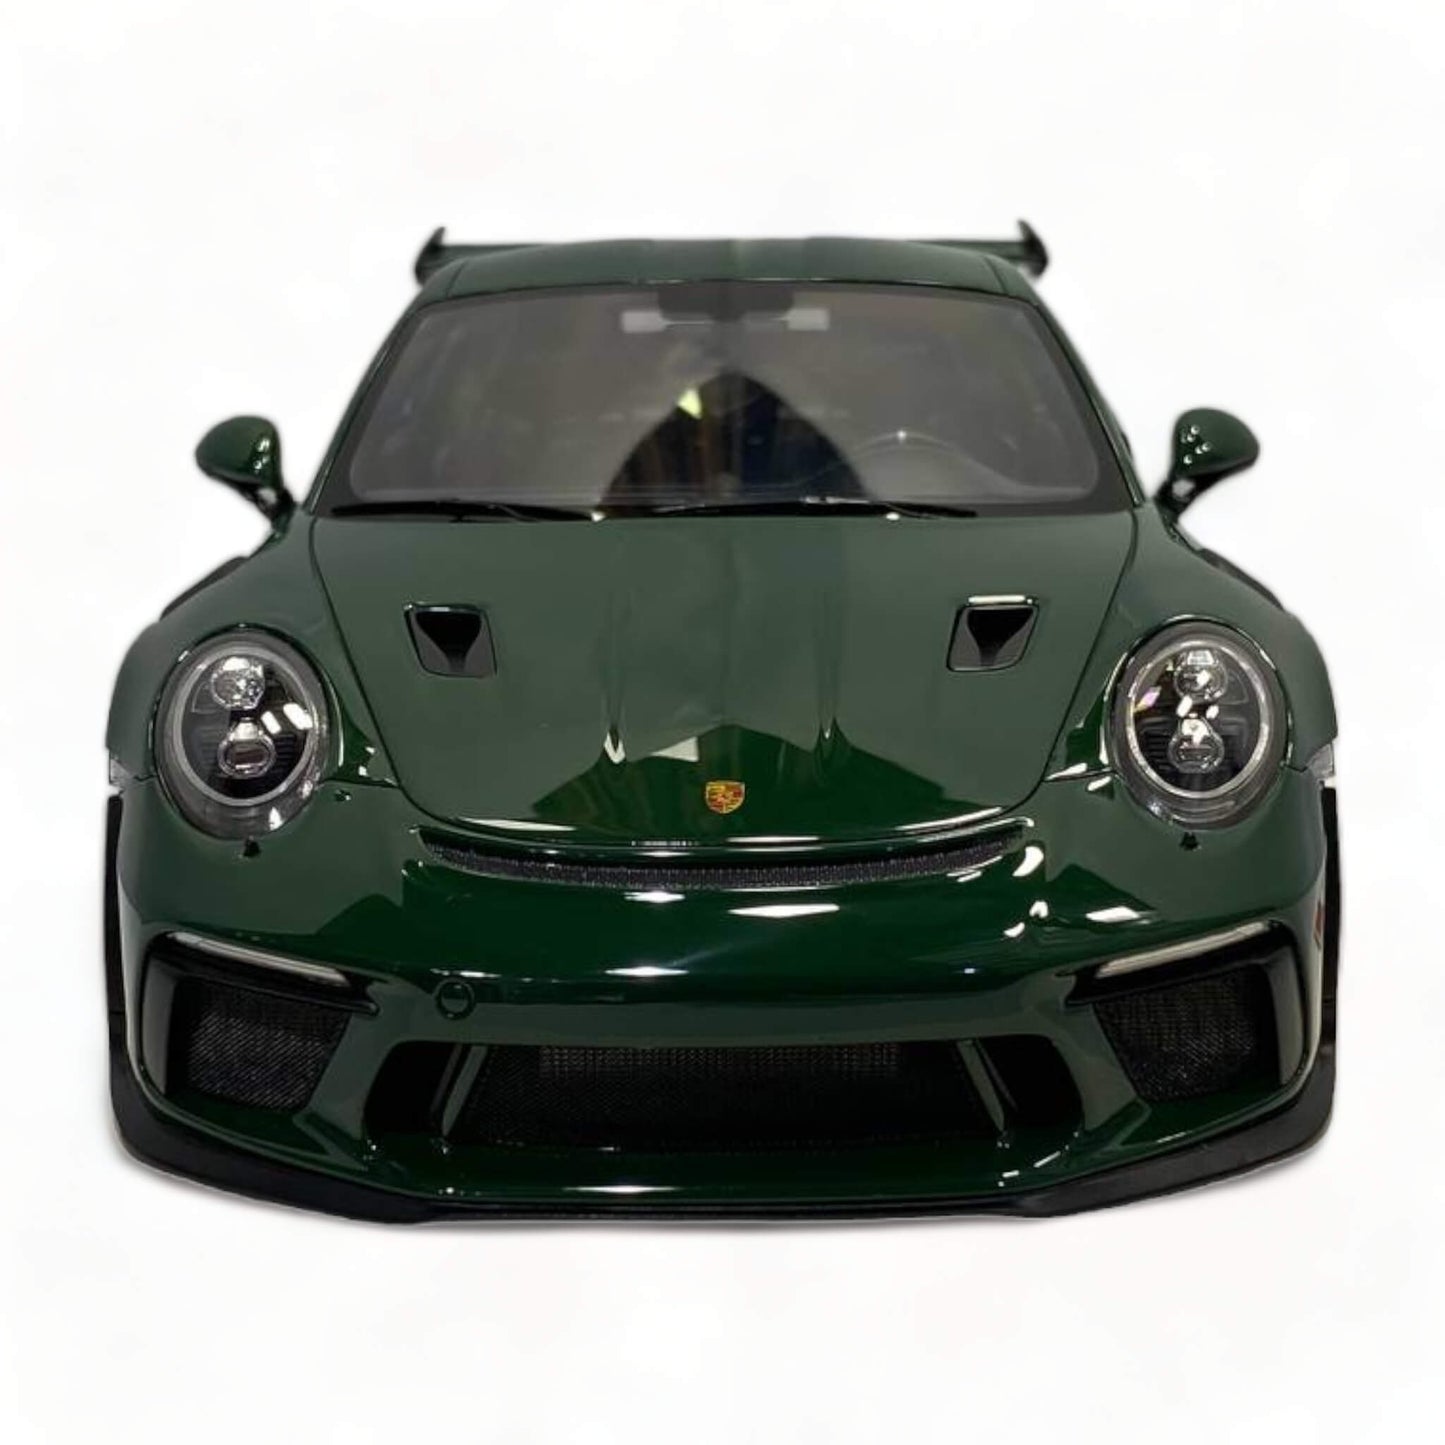 Porsche 911 GT3 RS by Make Up (5 of 30):